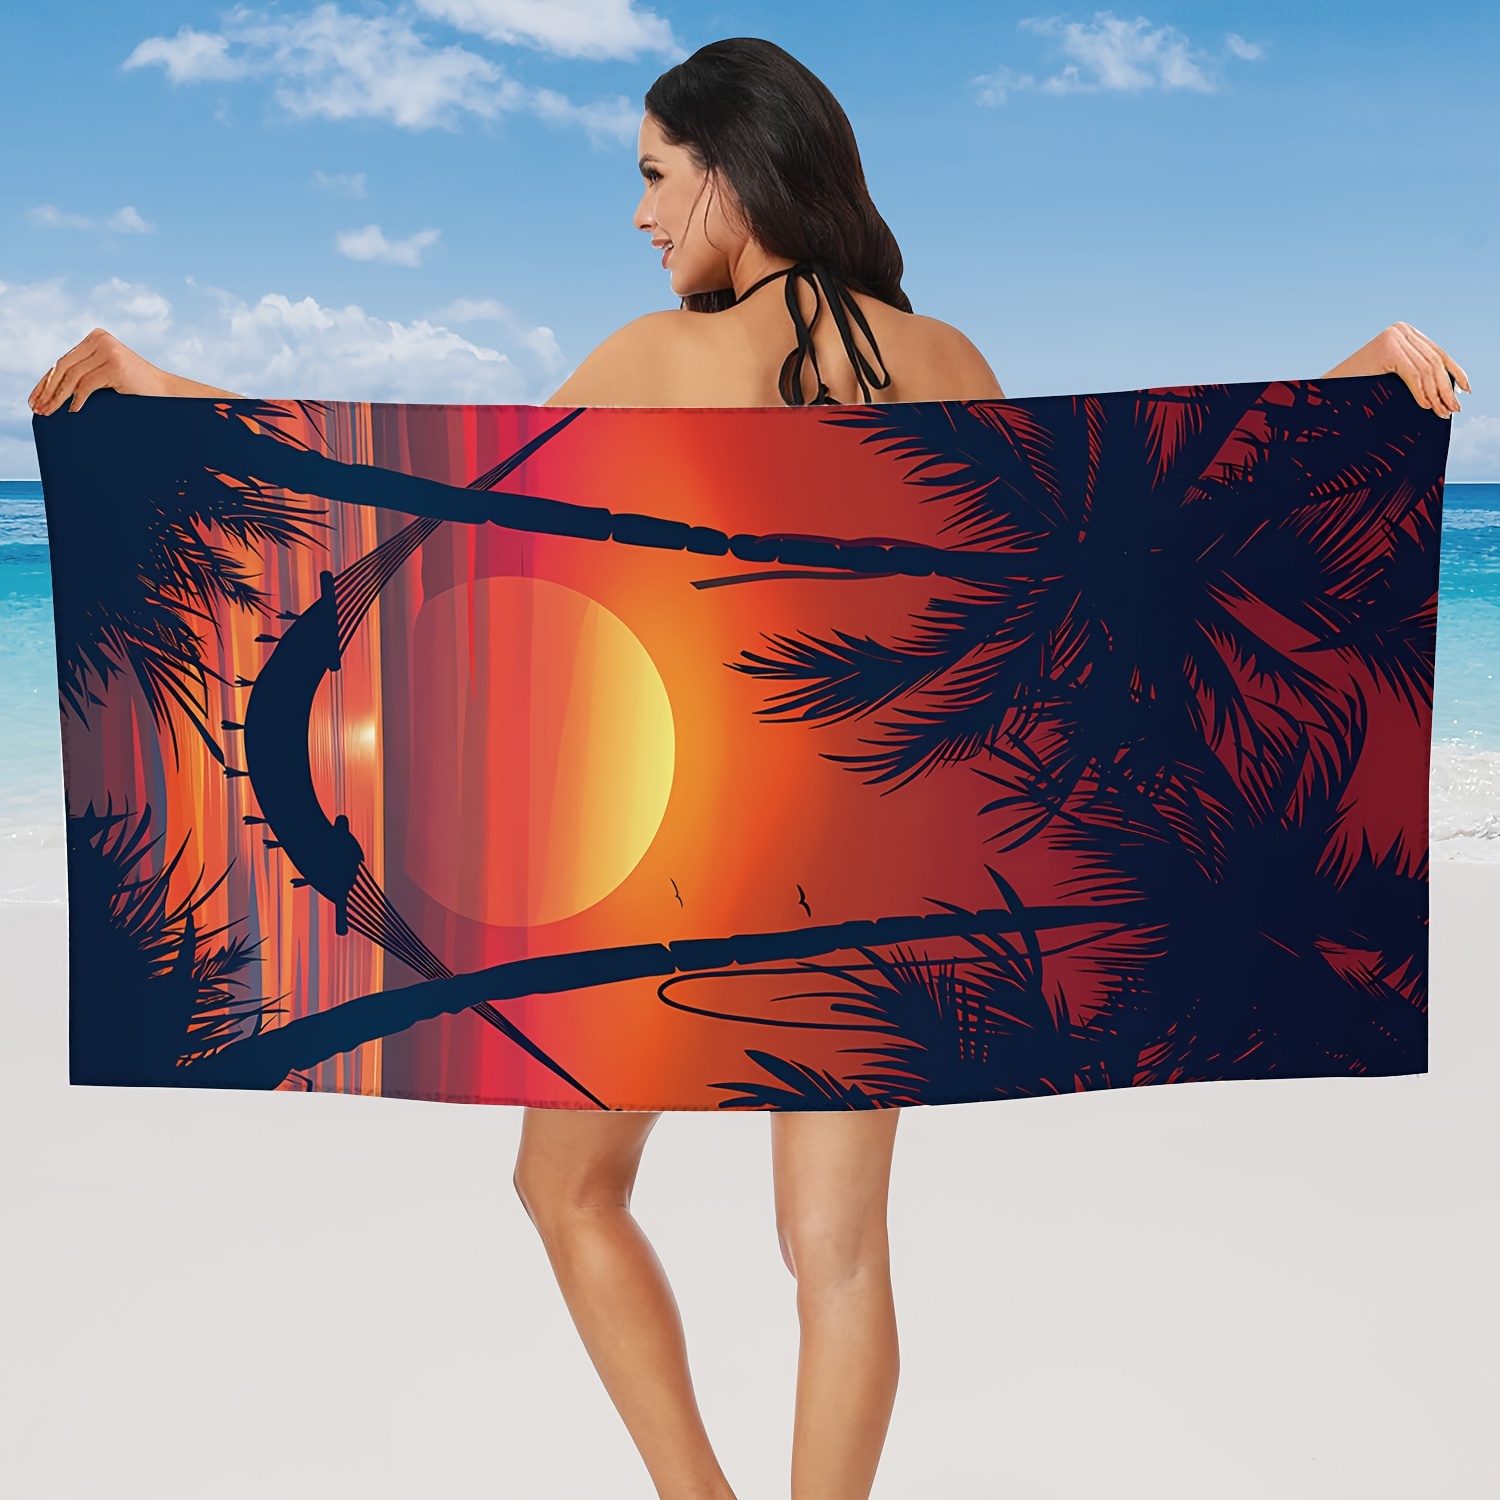 

1pc Summer Dusk Aesthetic Microfiber Extra Large Beach Towel, Coconut Sunset Sea Orange Red Beach Towel, Durable And Quick-drying Sunscreen Washable And Absorbent Bath Towel